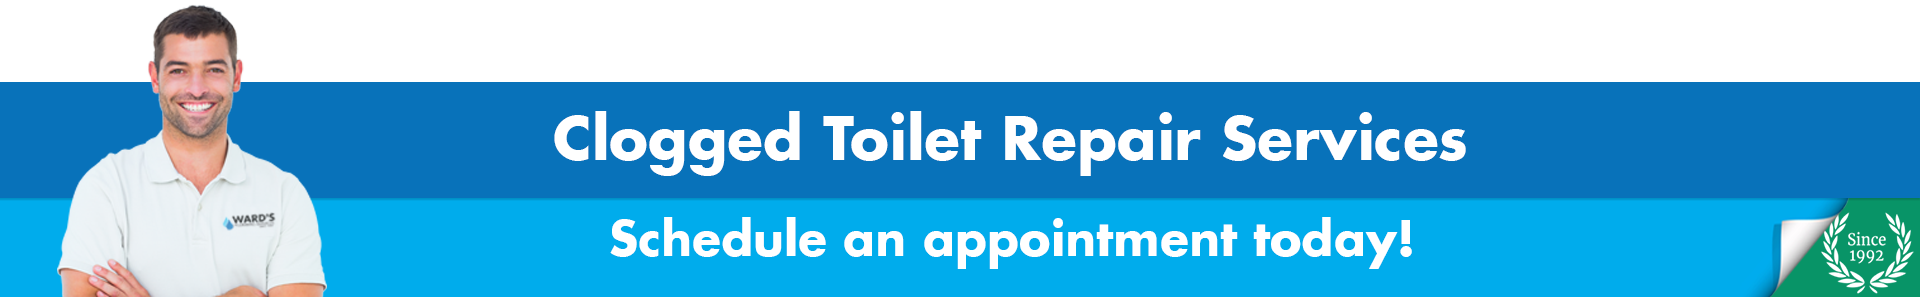 Clogged Toilet Repair Services